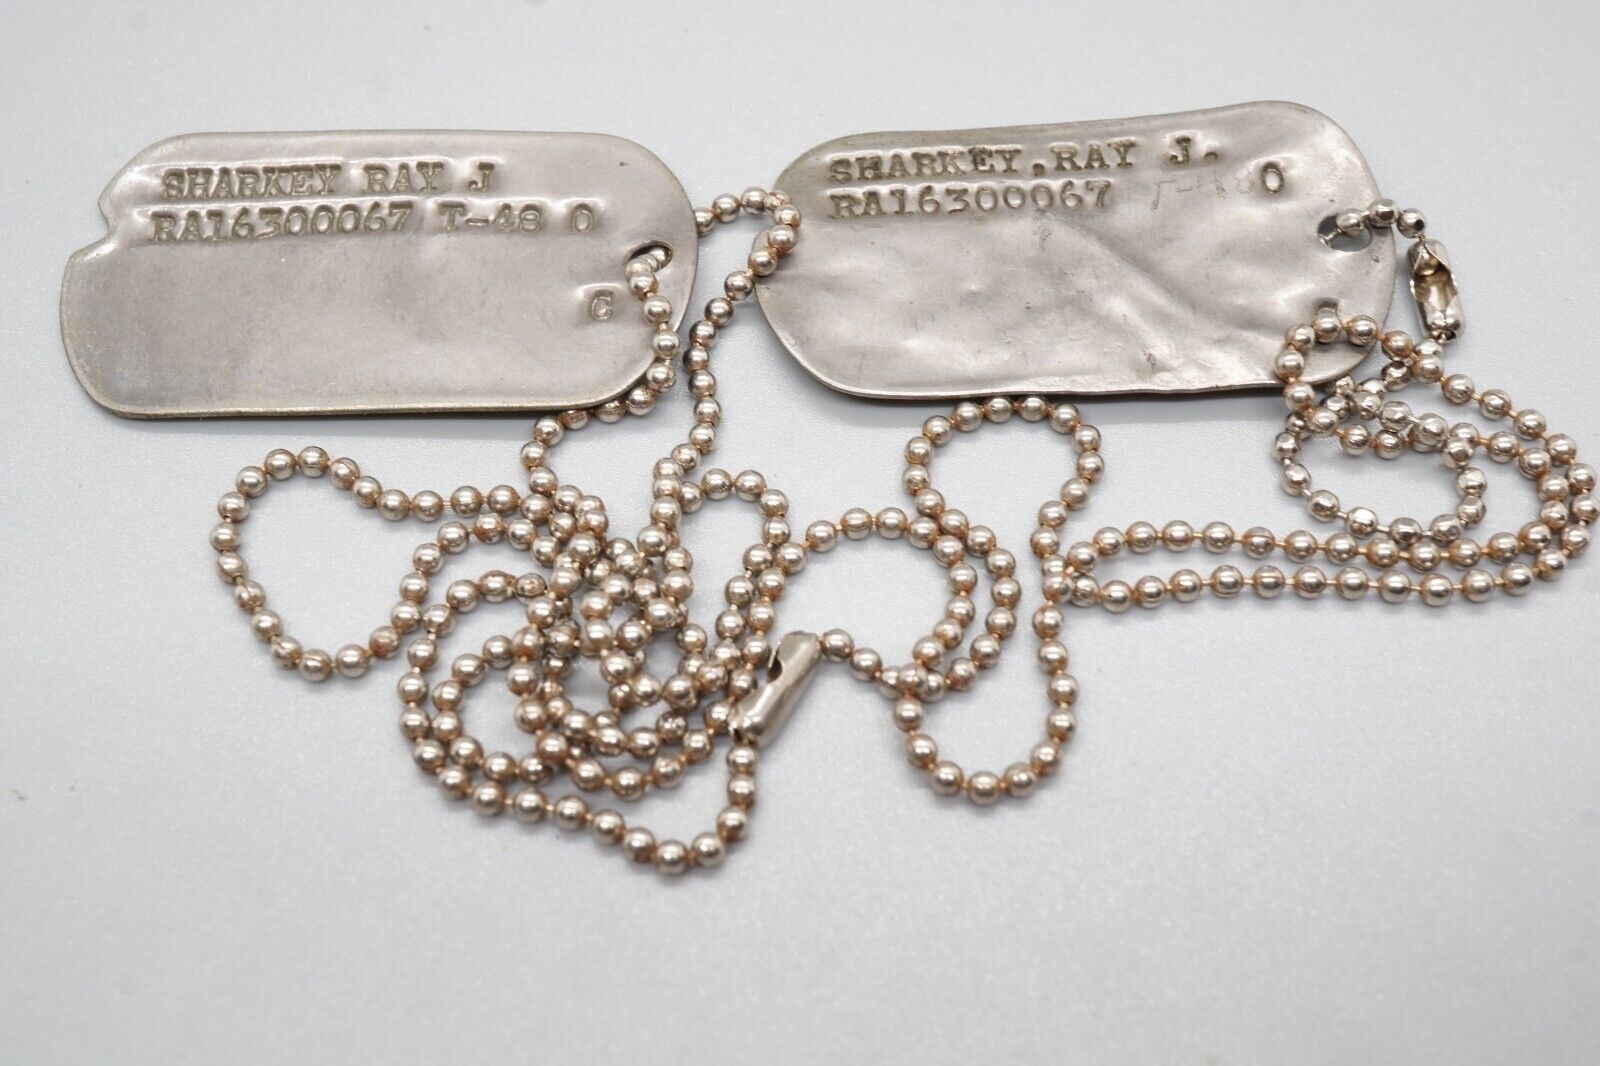 Post WWII - Pre-Korean War 1948 Regular Army Dog Tags Set T-48 With Bead Chains